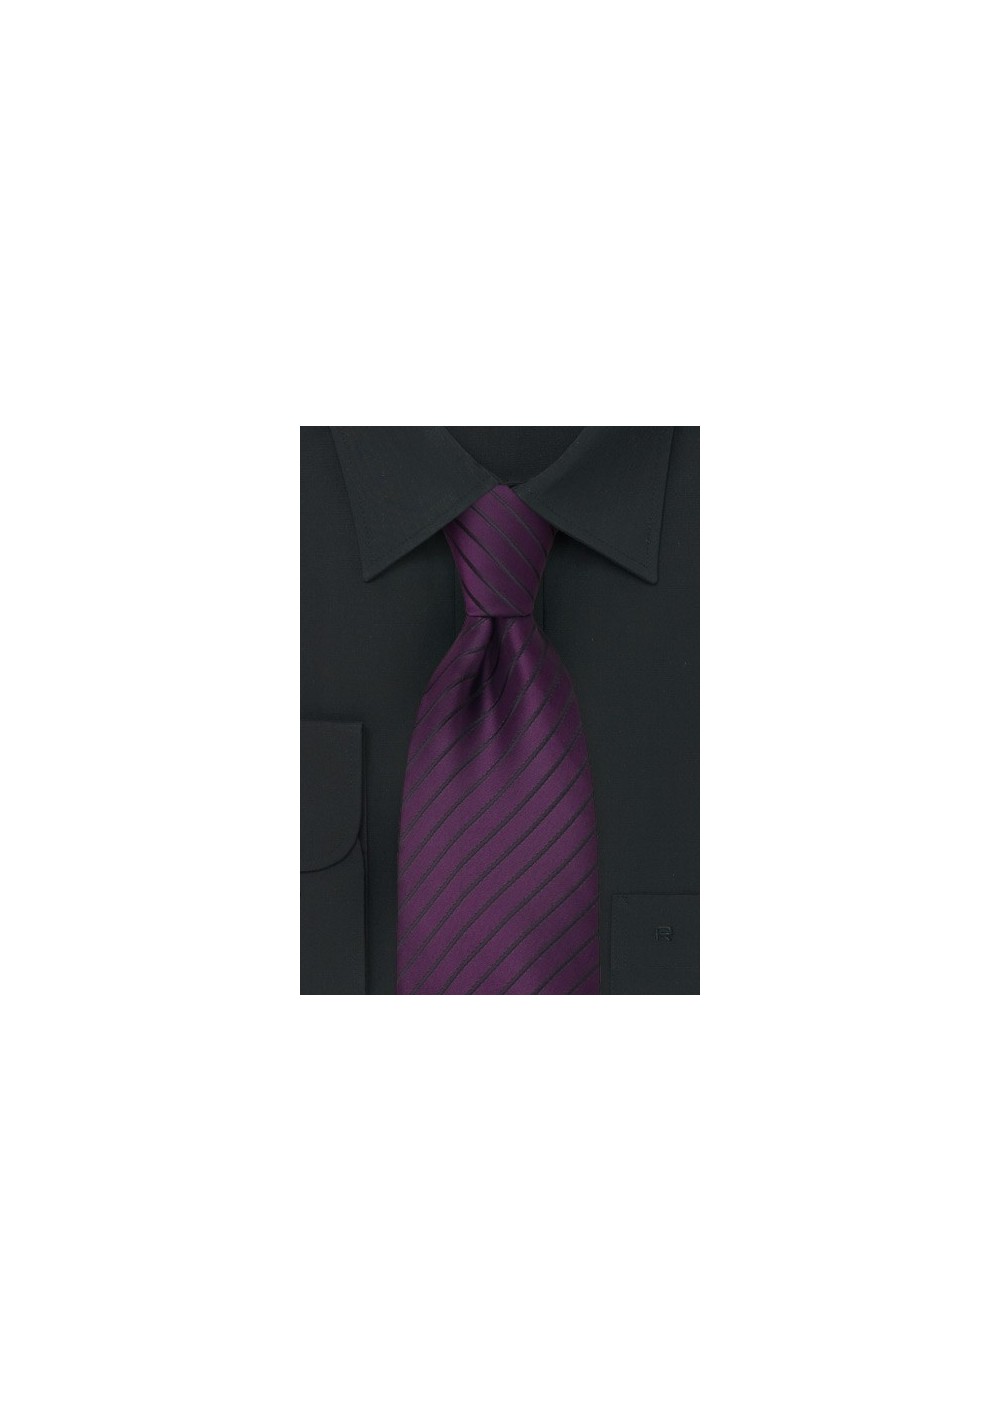 XL Tie in Purple and Black